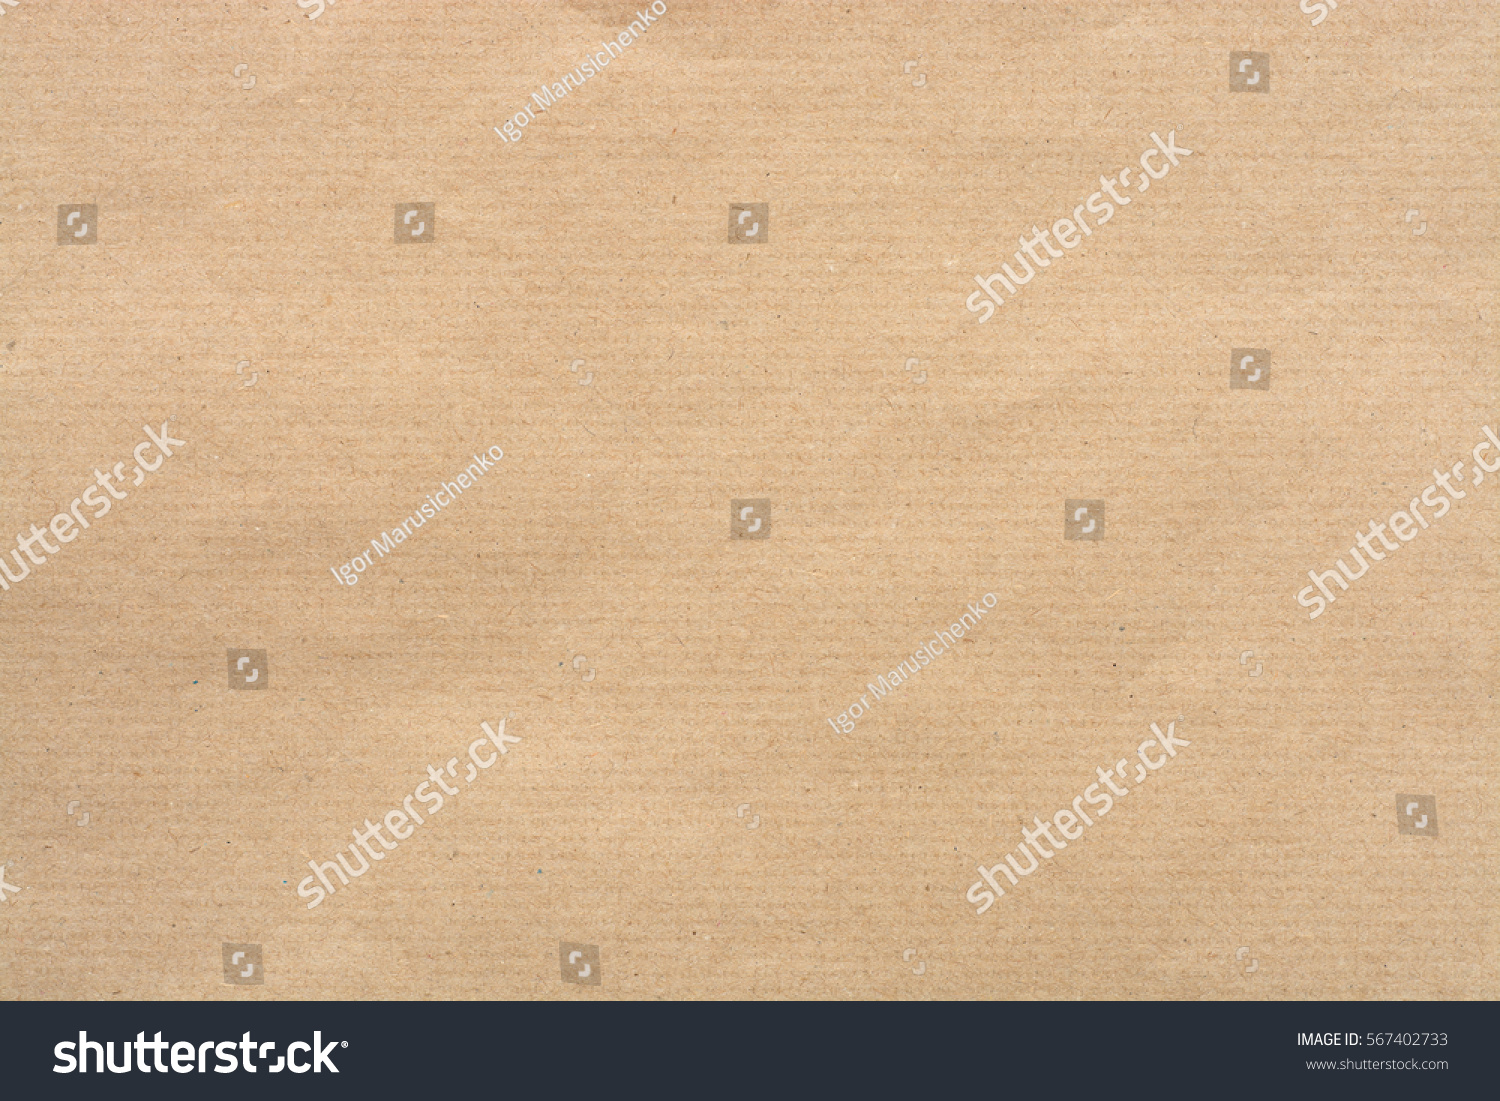 Kraft Paper Texture with horizontal stripes for background. #567402733